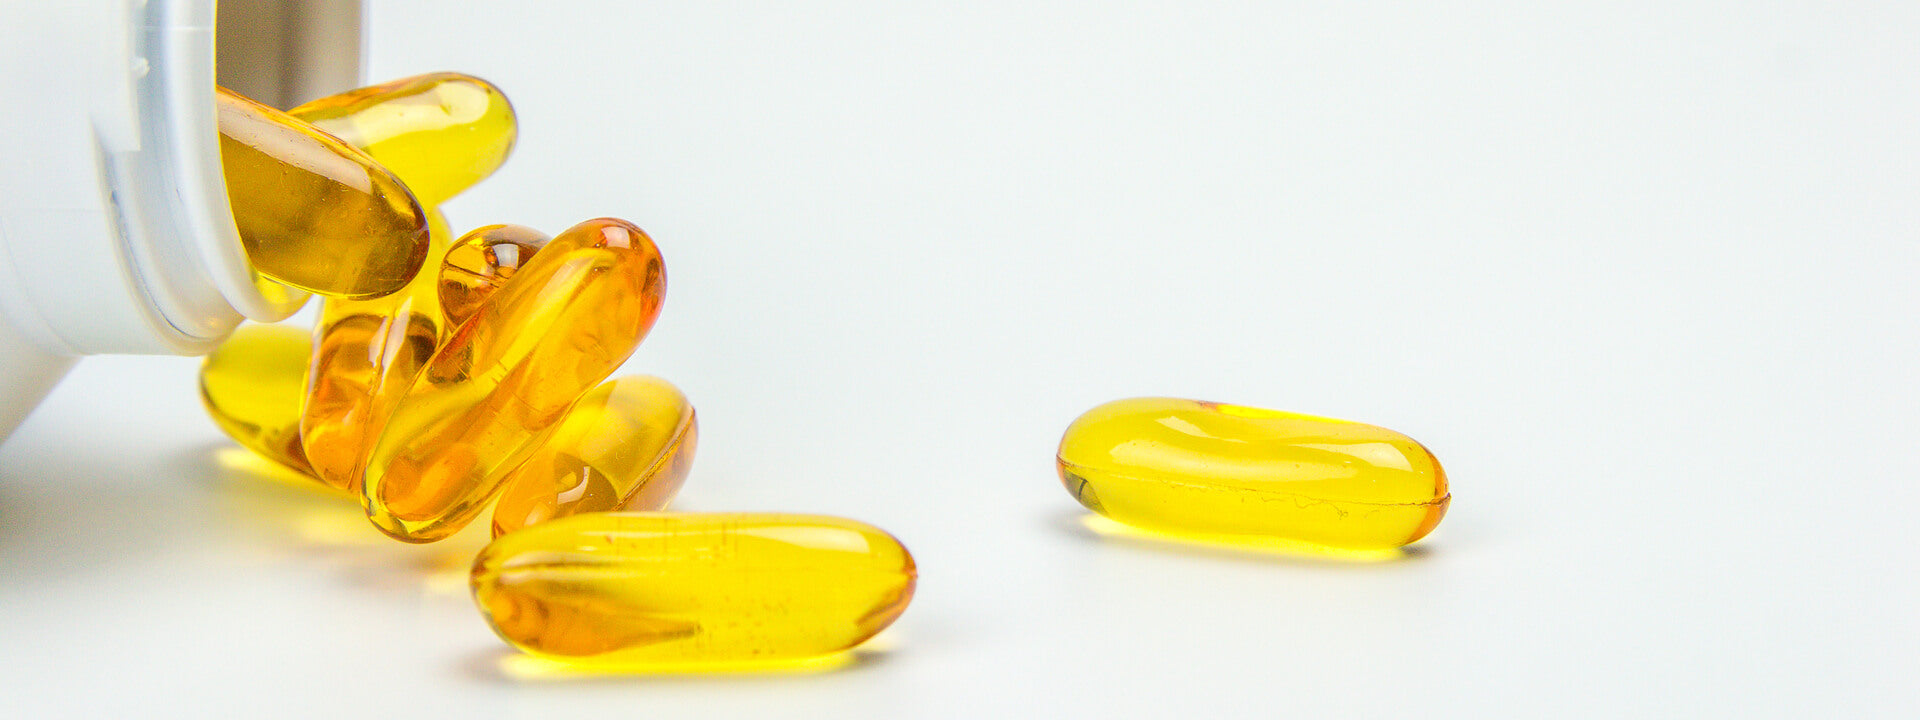 What Are Omega 3 Fatty Acids?